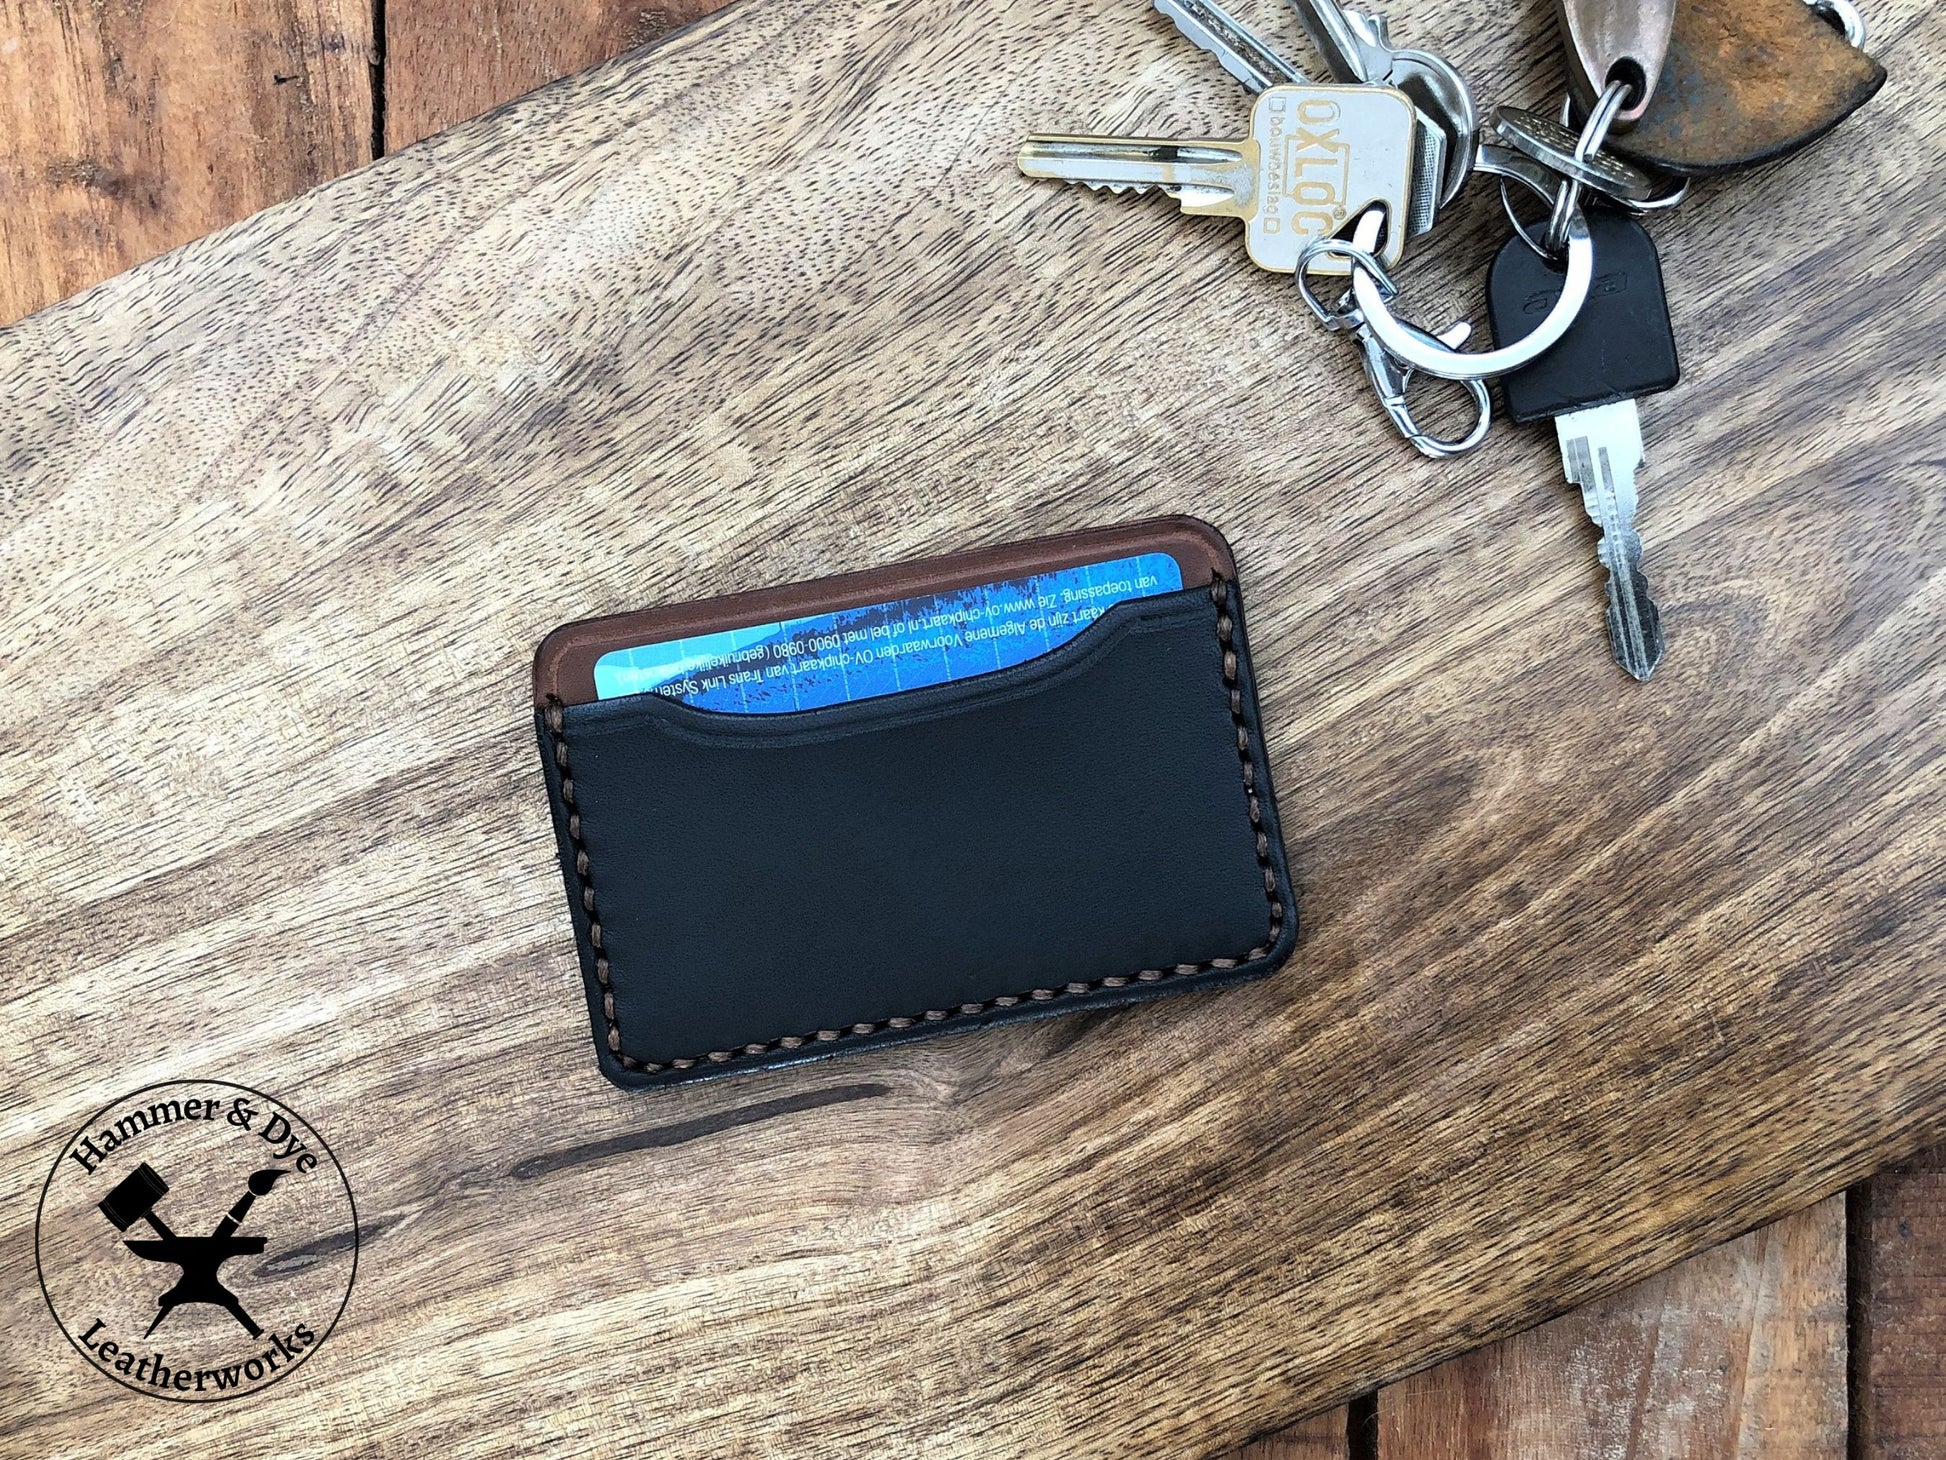 Minimalist Leather Card Wallet in Black and Brown next to some keys